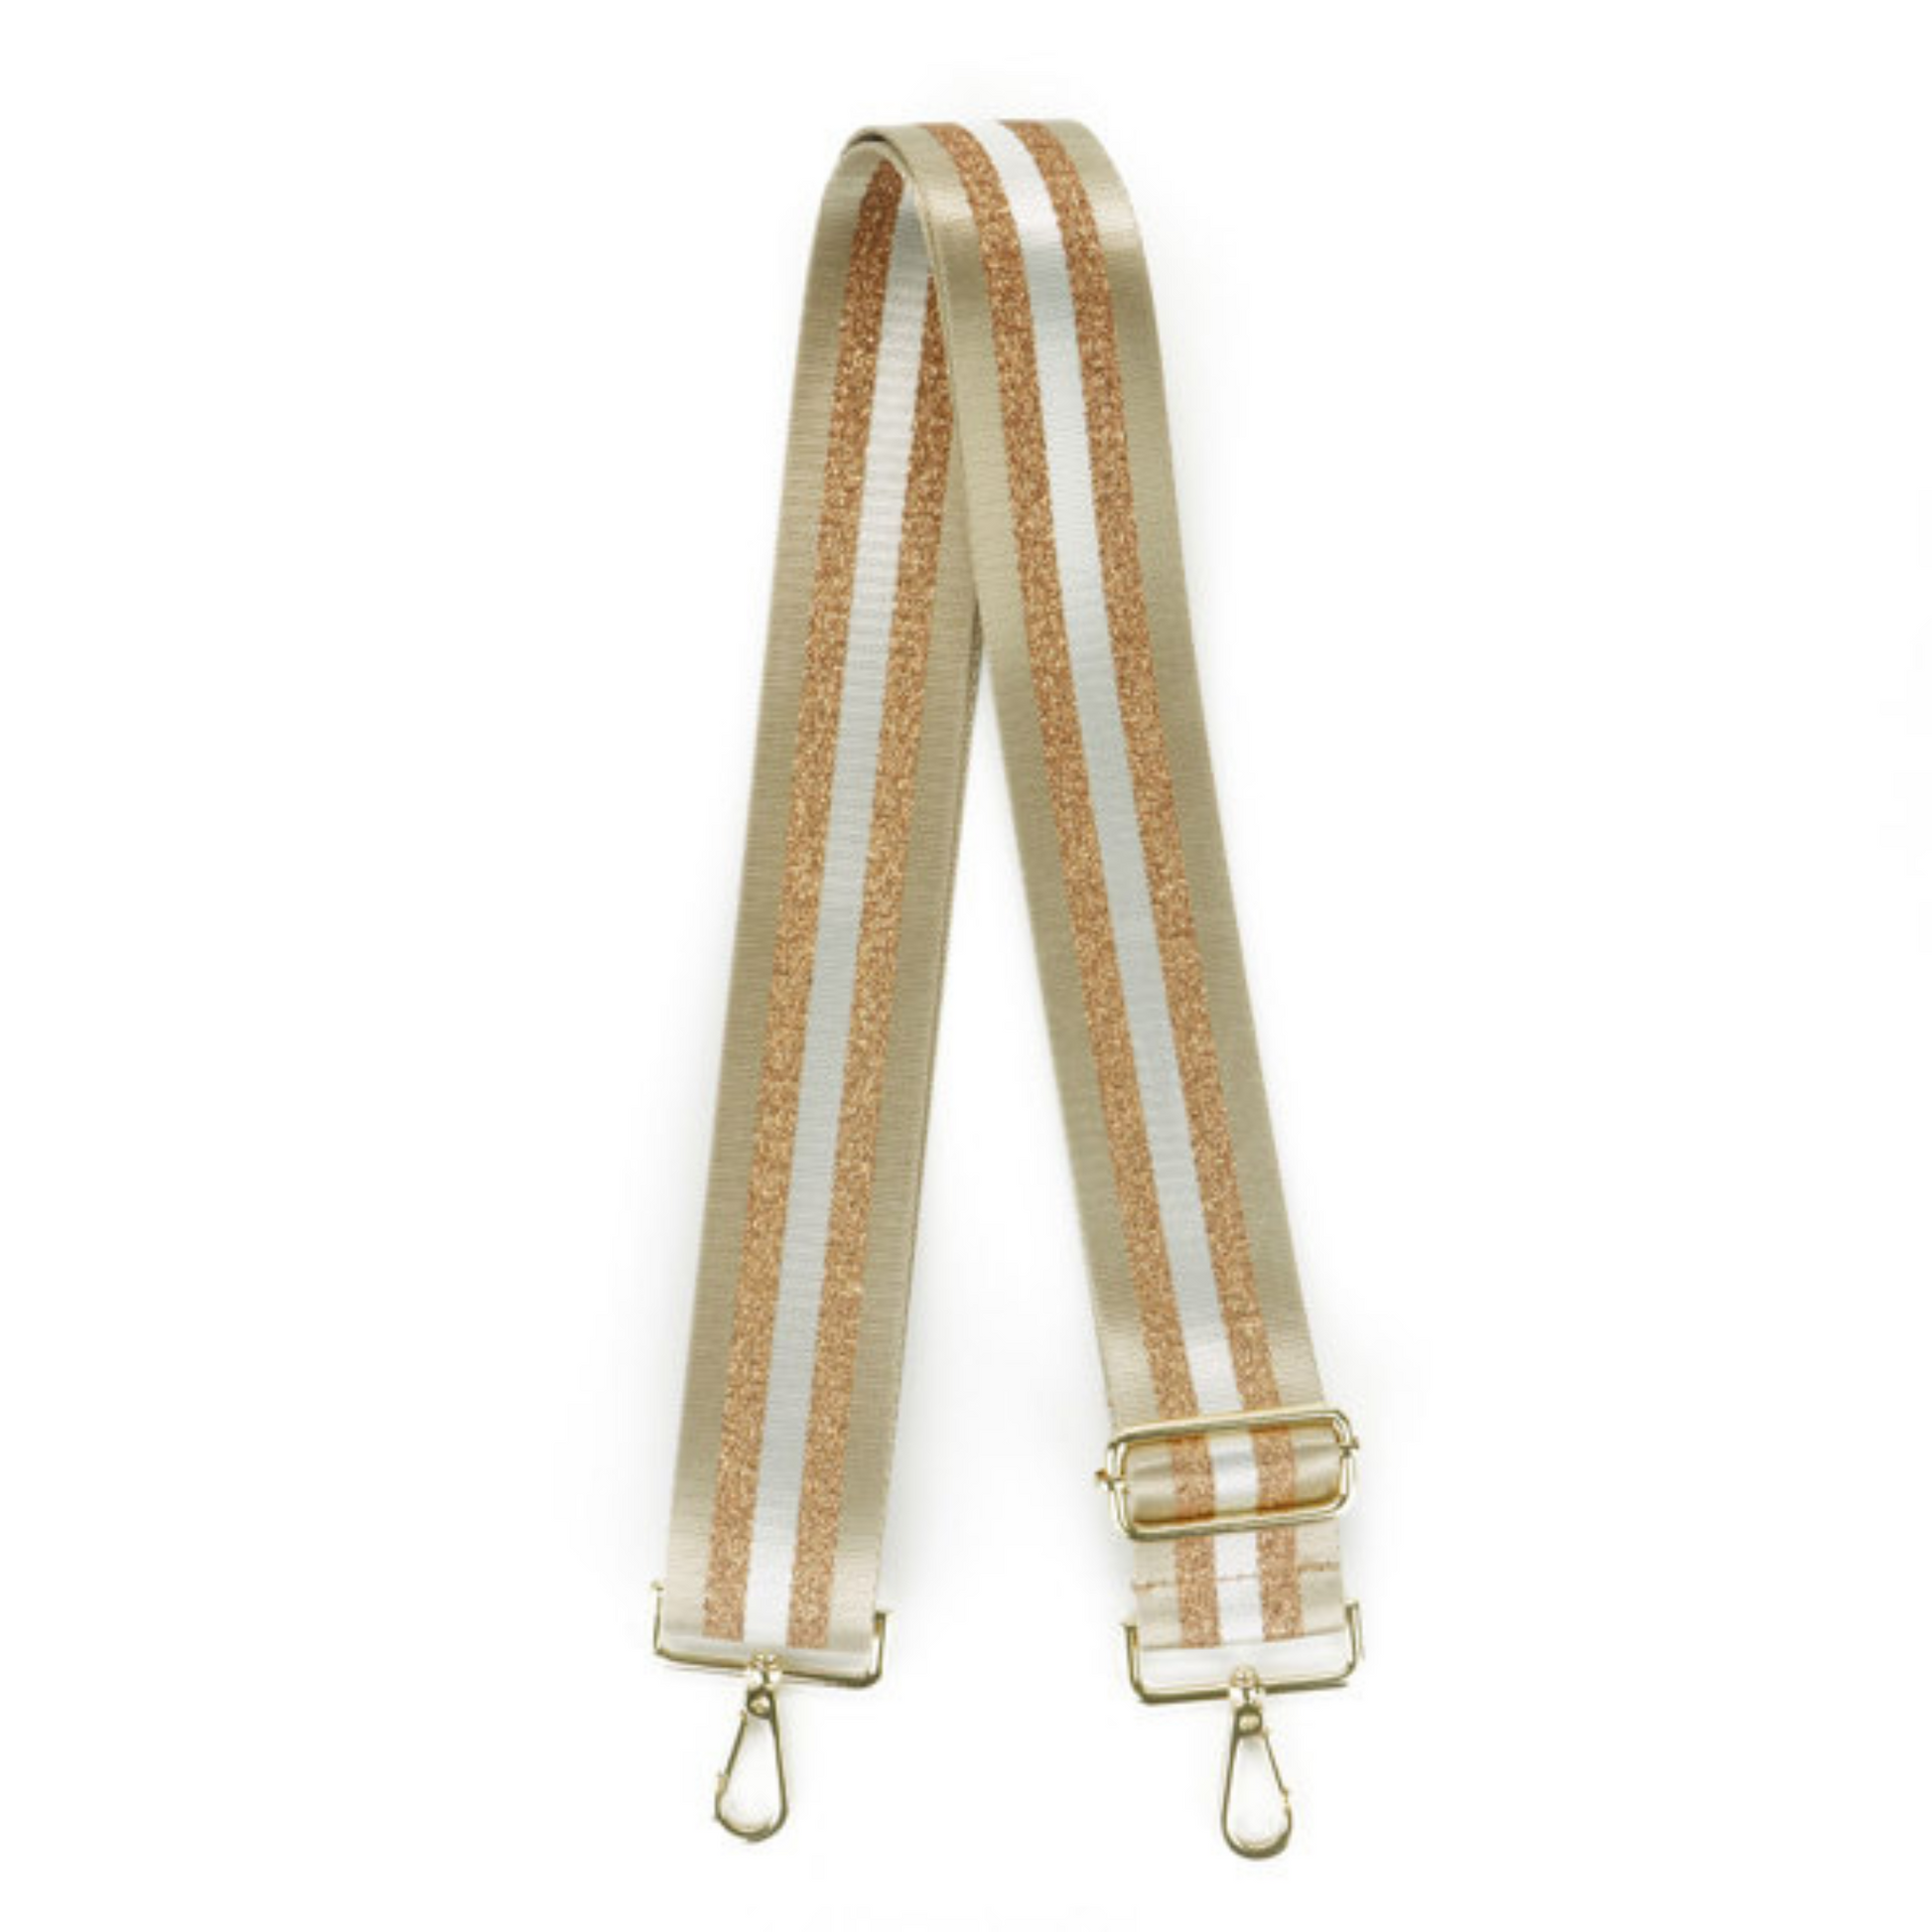 Gold and Cream striped purse strap from Kedzie. Adjustable and interchangeable